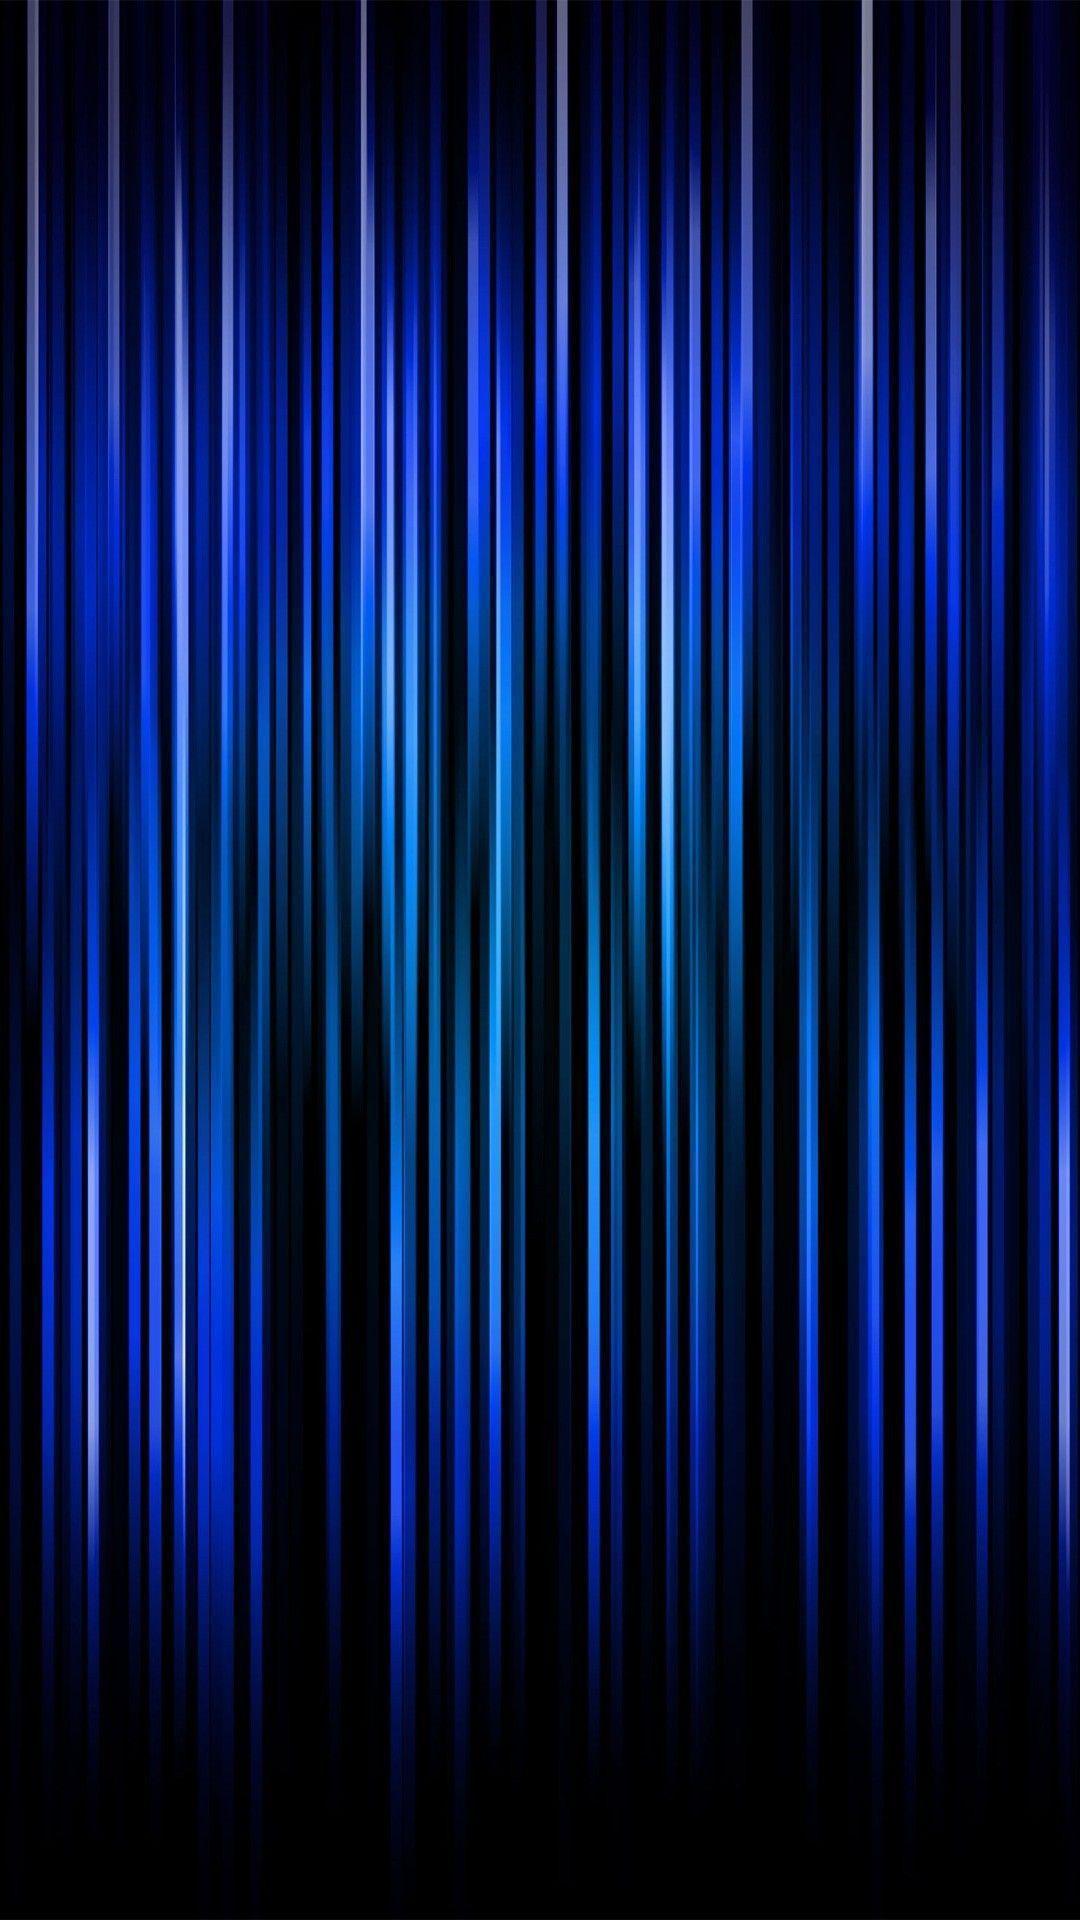  Hd  Wallpapers  Vertical  For Mobile Wallpaper  Cave